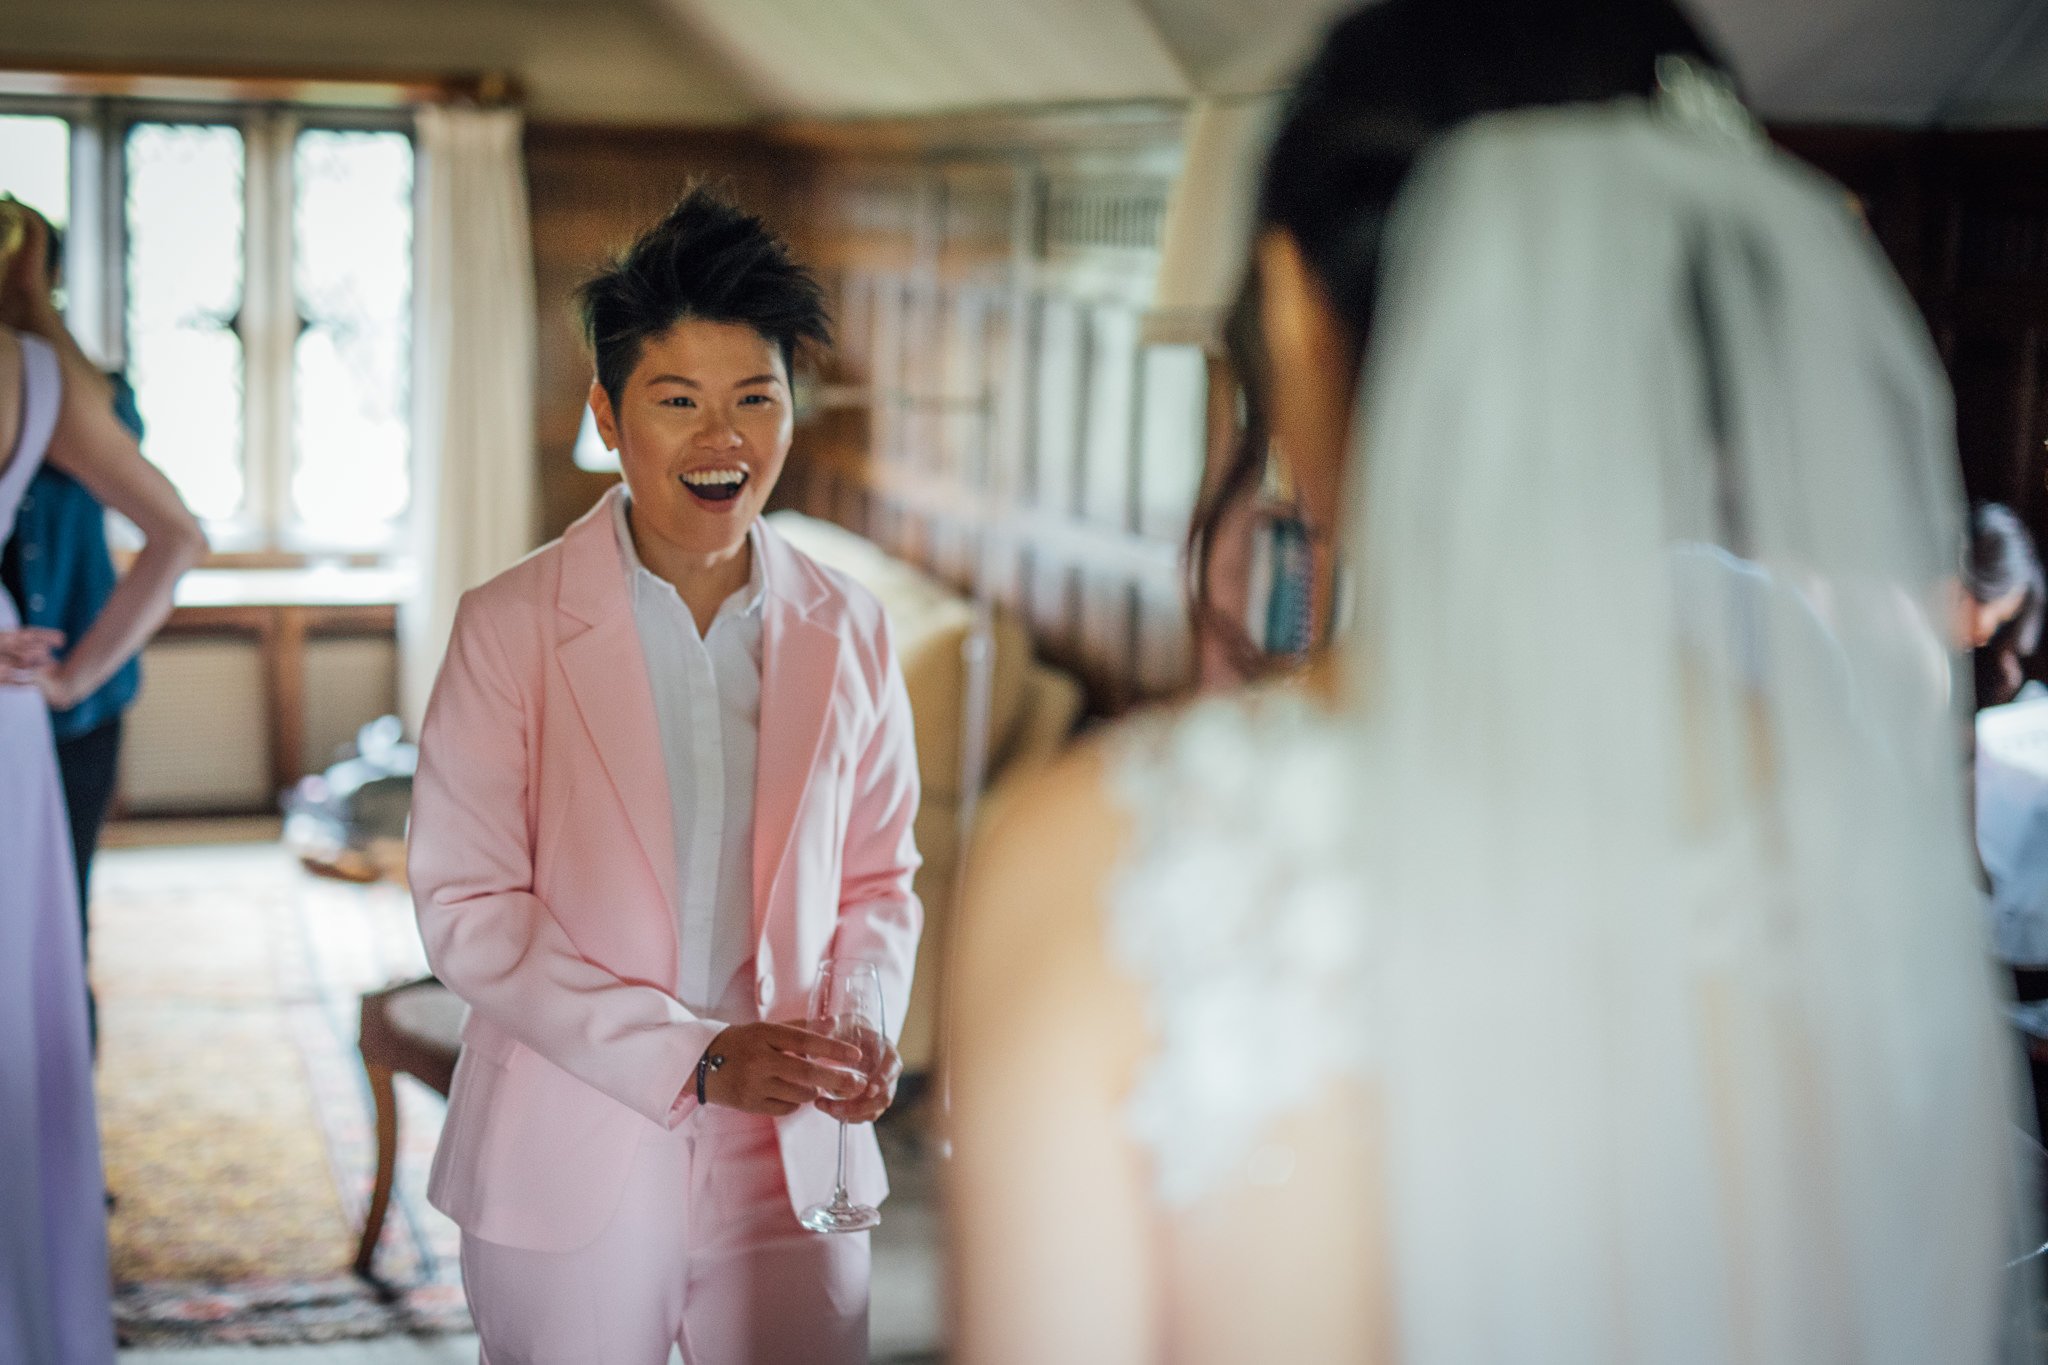  Friend of bride looks amazed at the Bride in her dress 